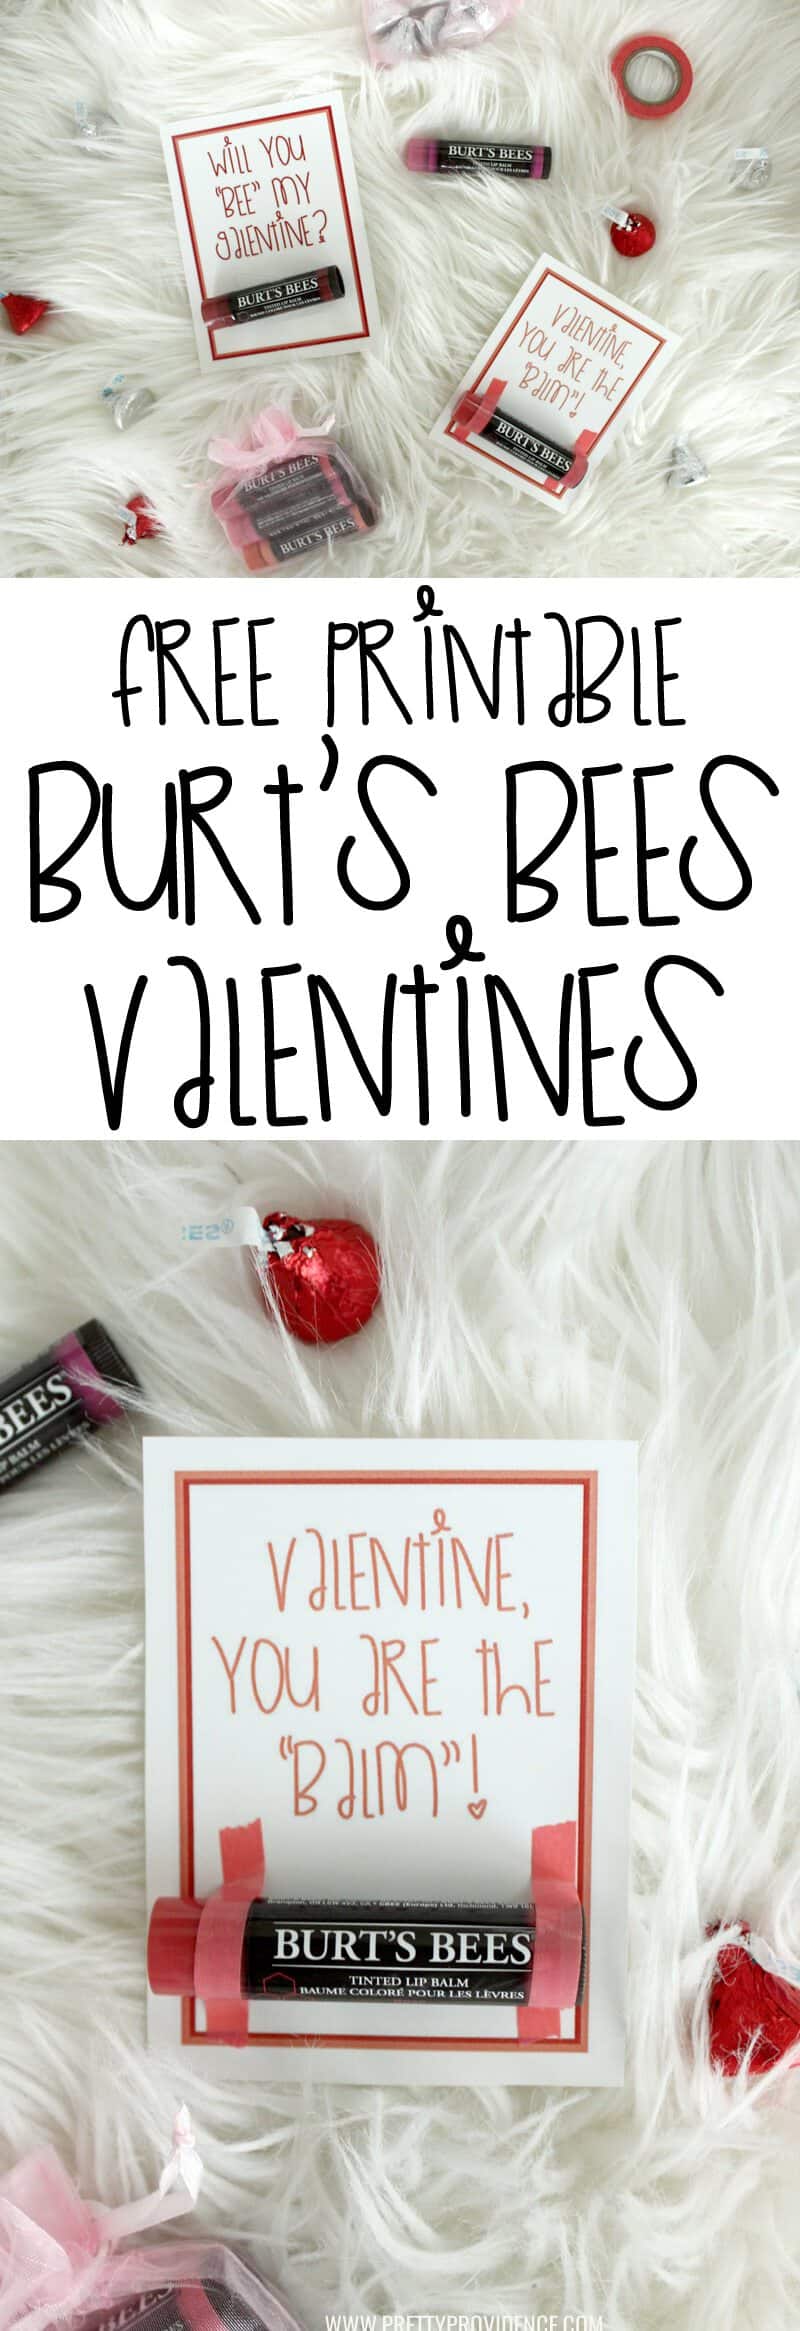 How fun are these free printable Burt's Bees Valentines? So fun for giving a gift to your friends and loved ones that they will actually use! 